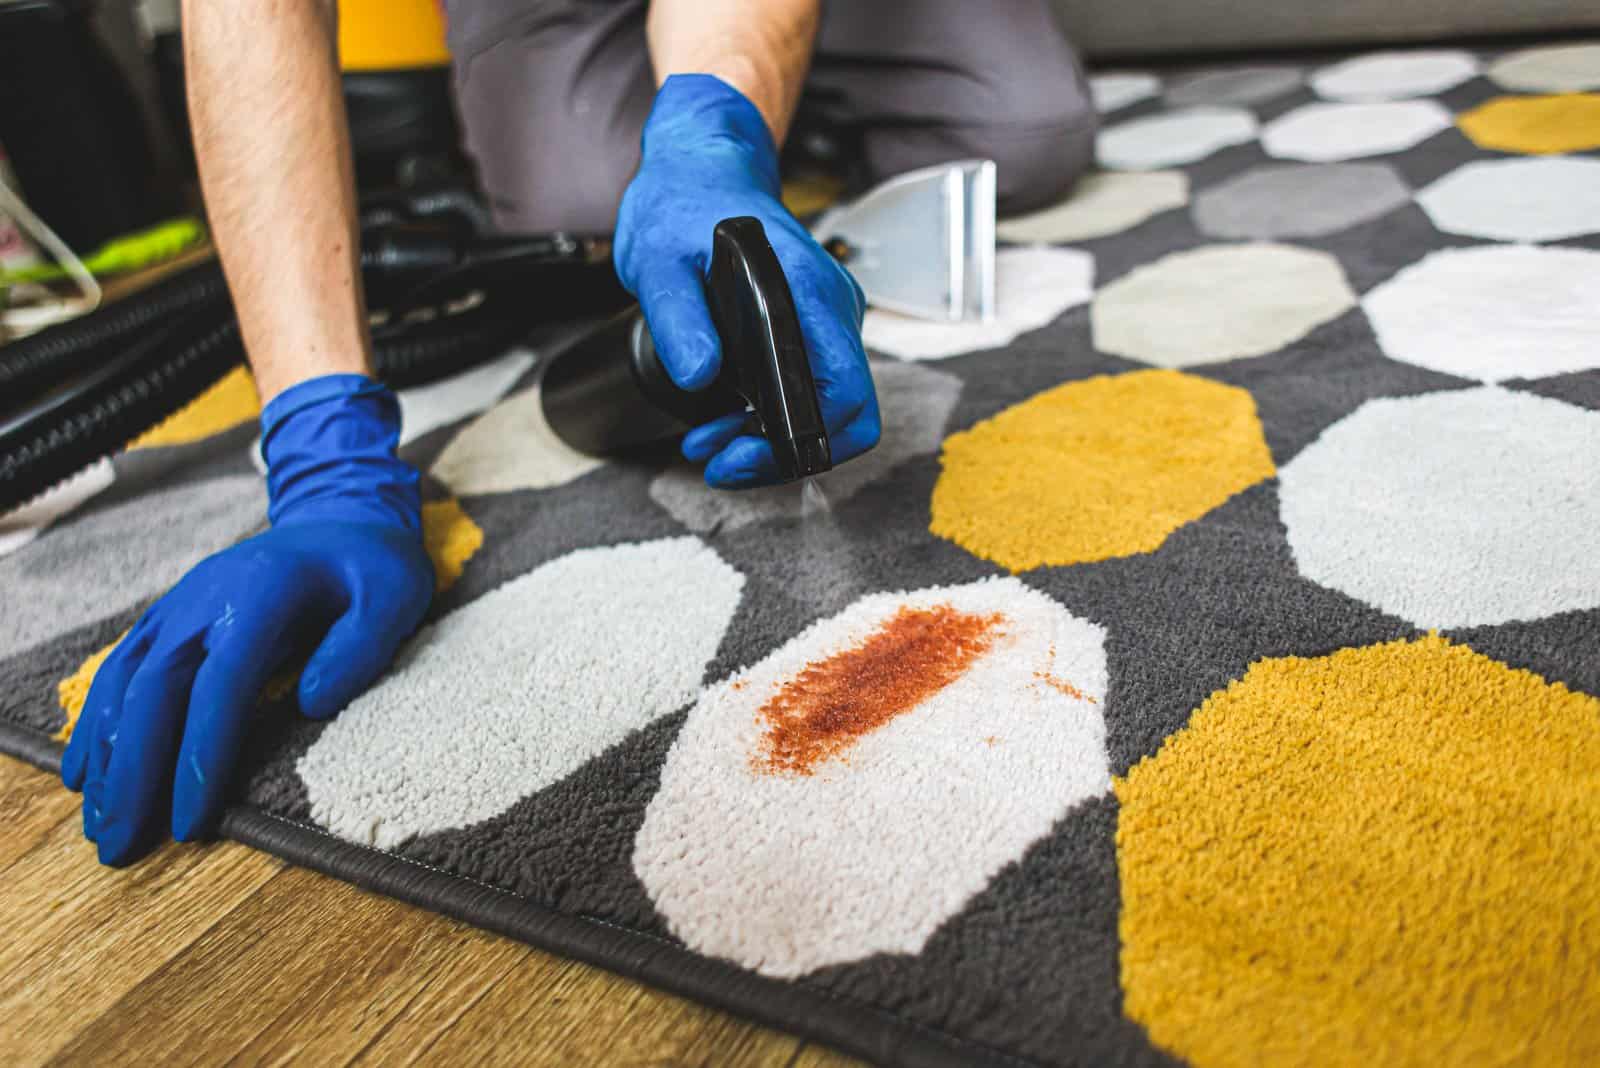 How To Clean Diarrhea Out Of Carpet? No Mess In A Few Steps